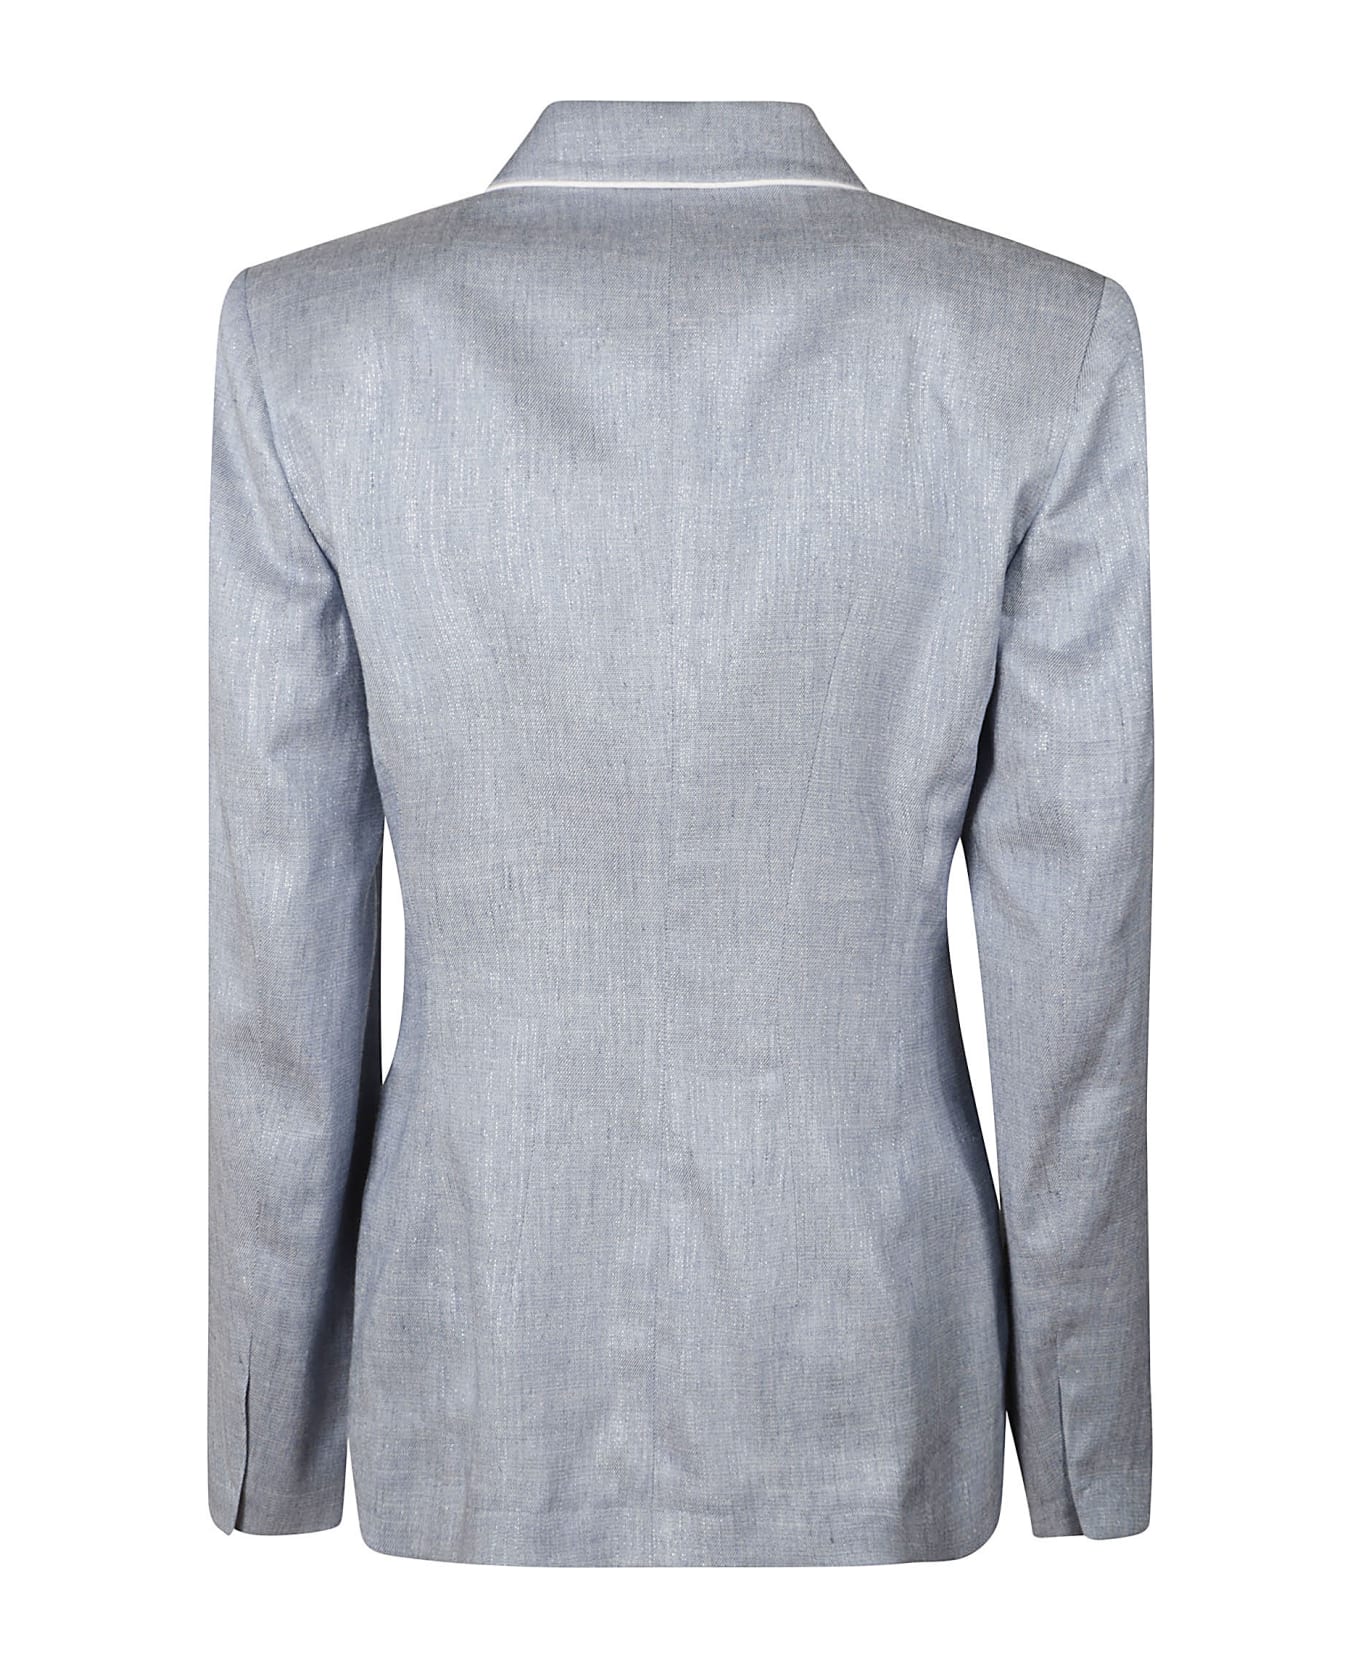 Genny Jacquard Double-breasted Dinner Jacket - LIGHT BLUE